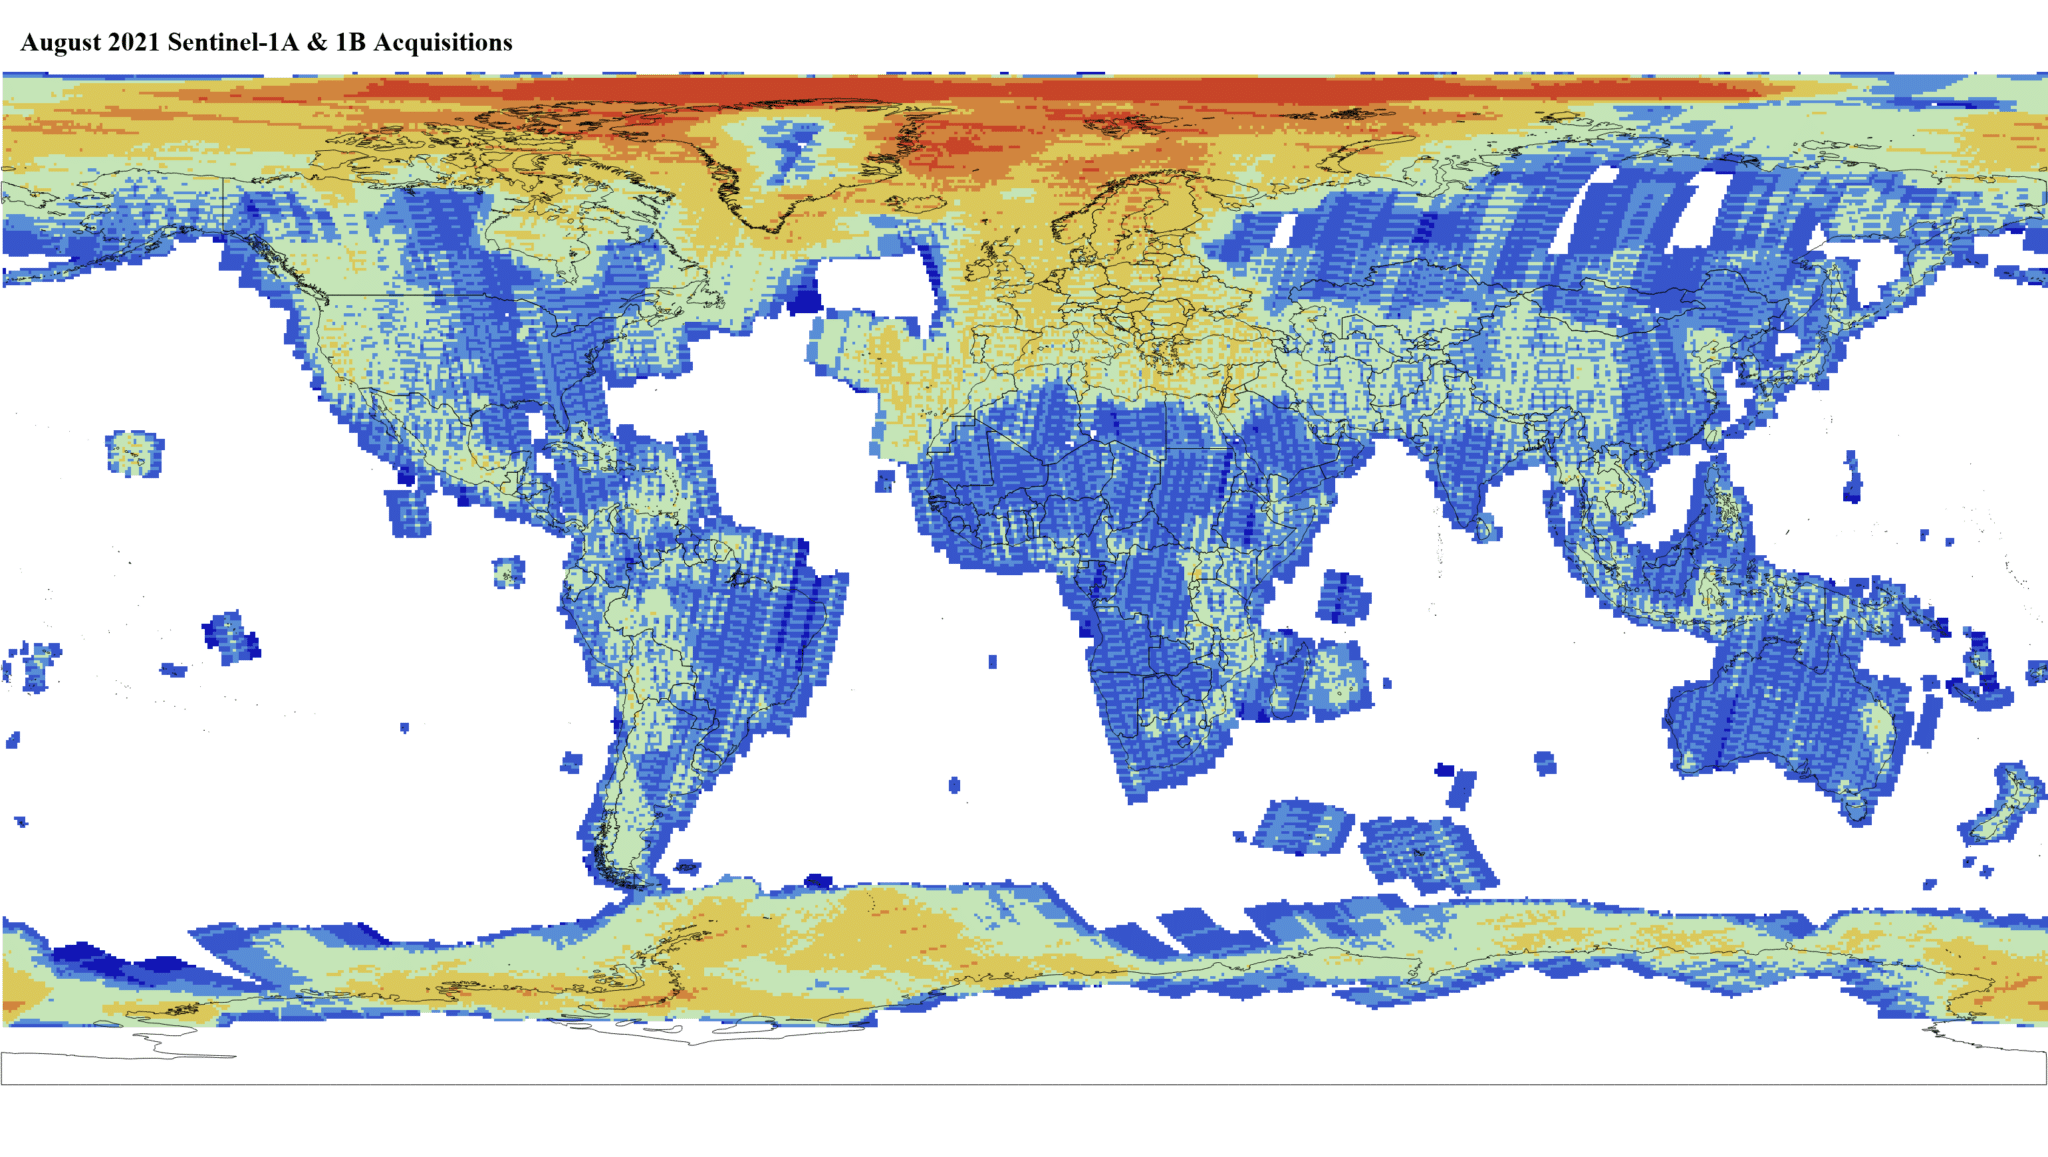 Heat map of Sentinel-1A and -1B GRD global acquisitions August 2021